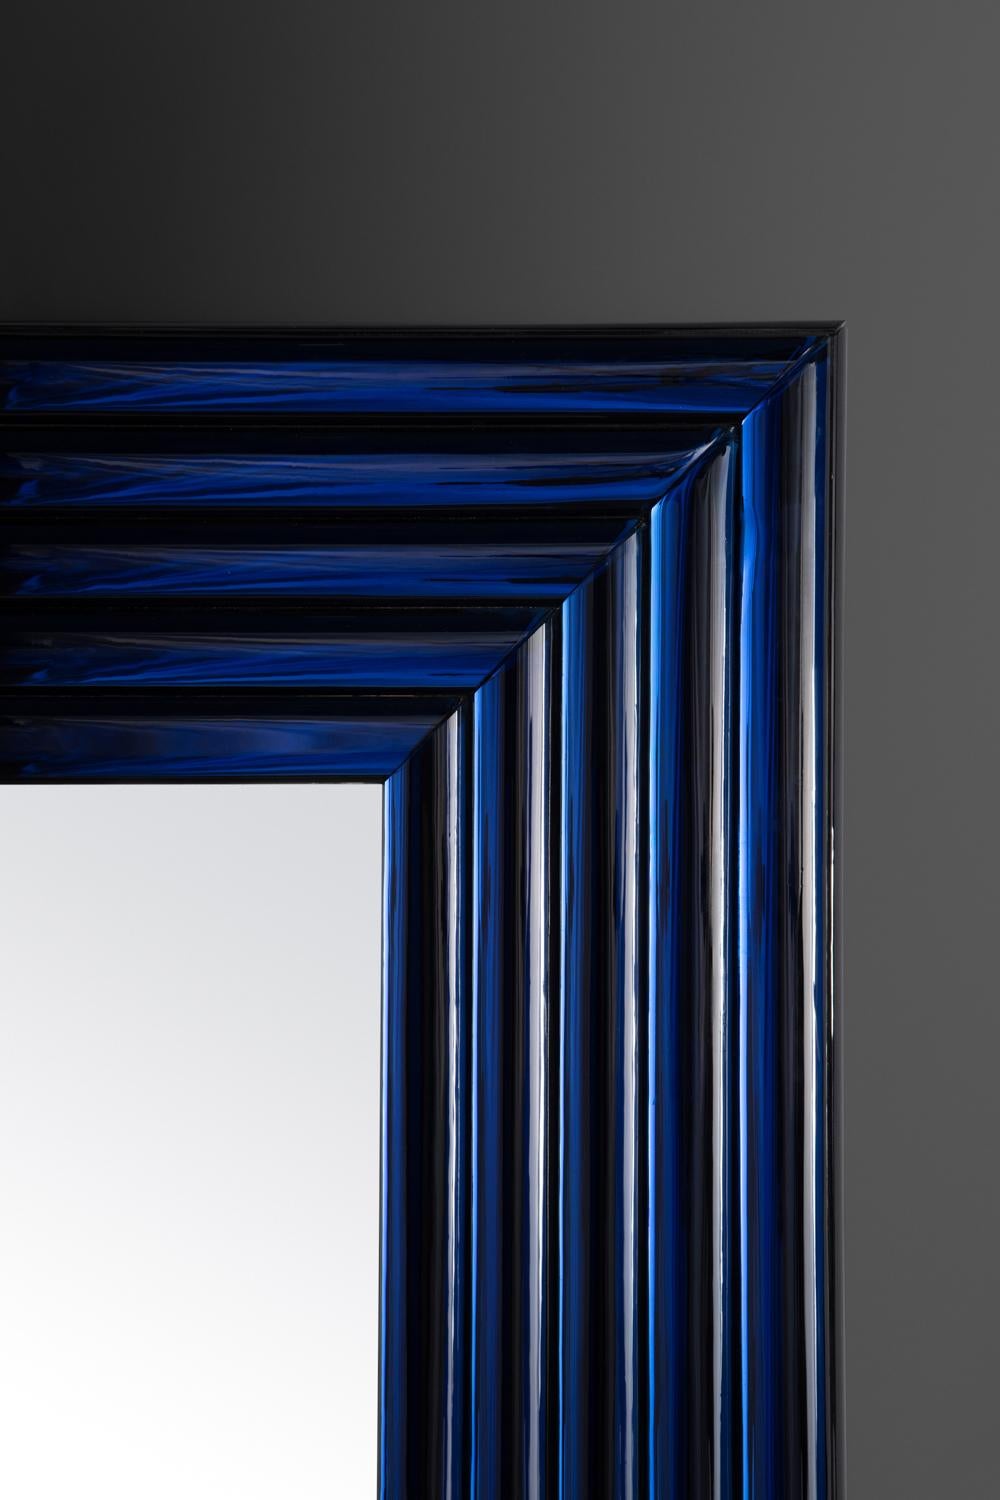 Square mirrored glass, surrounded by five nested frames composed of blue mirrored Vintage glass panels. Velluto means ‘velvet’ in Italian.